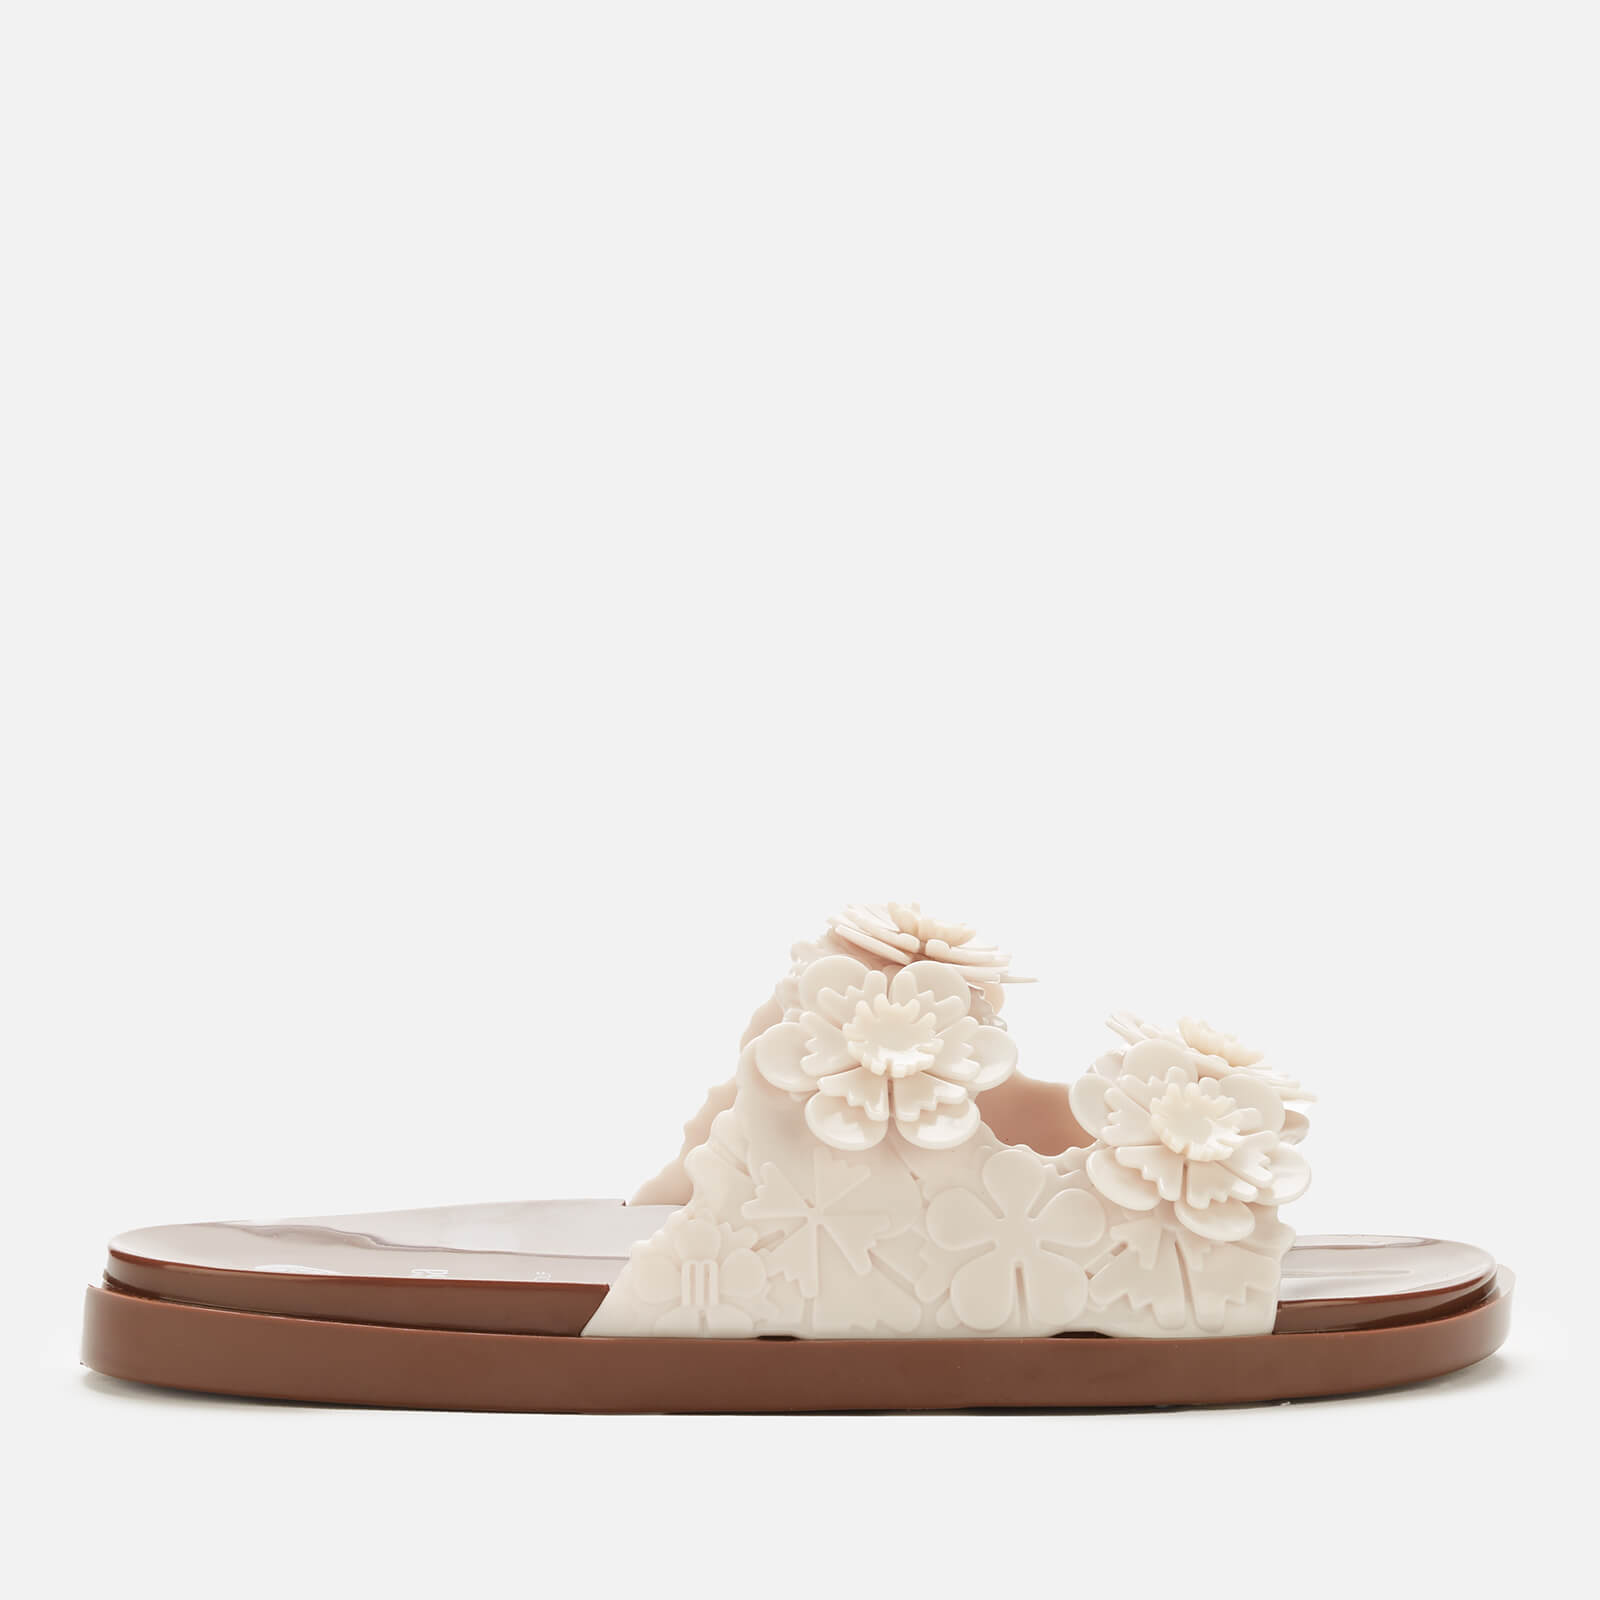 Melissa X Viktor and Rolf Women's Blossom Wide Sandals - Ivory Contrast - UK 5